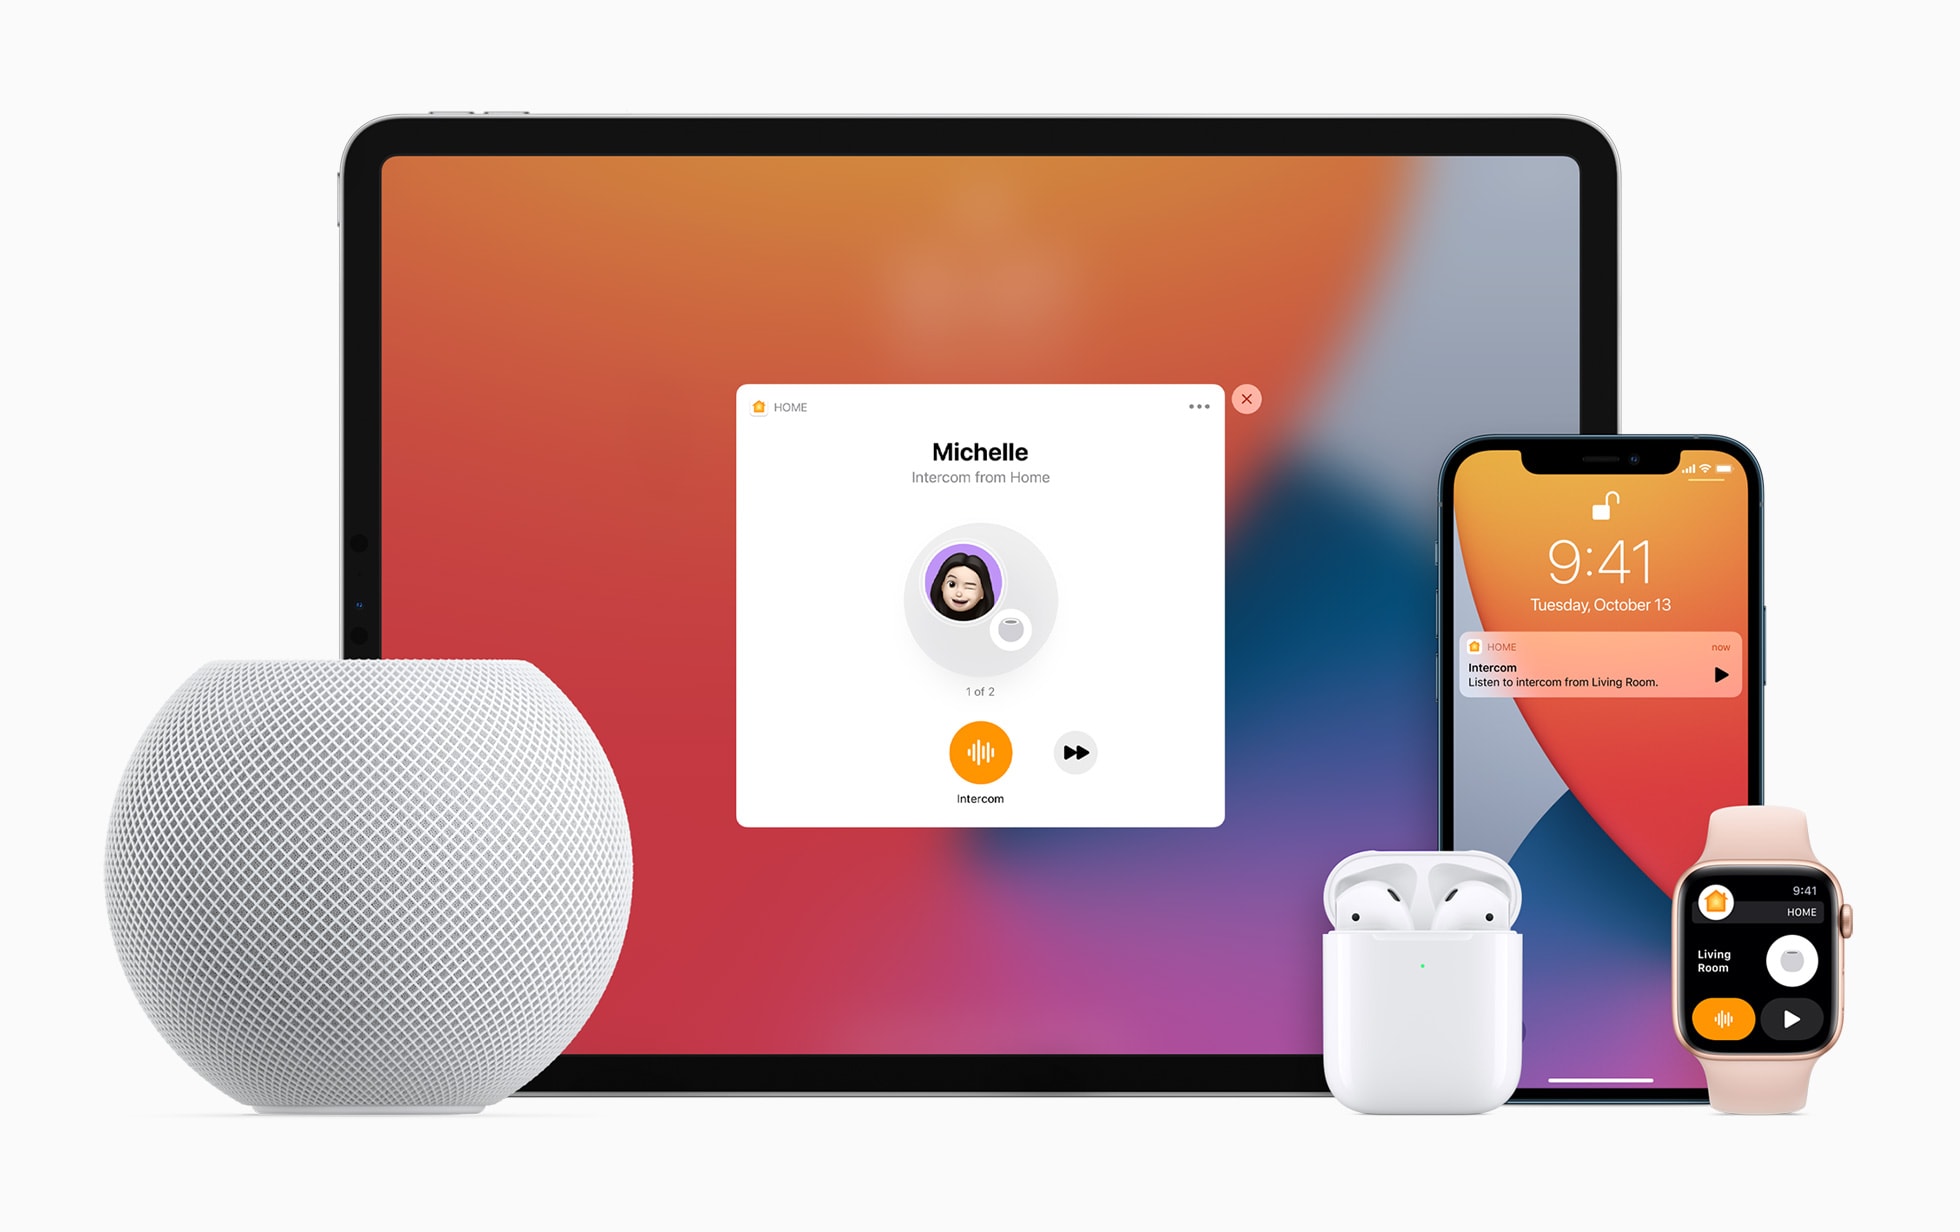 If you use multiple Apple devices, HomePod mini is the best smart speaker for you.